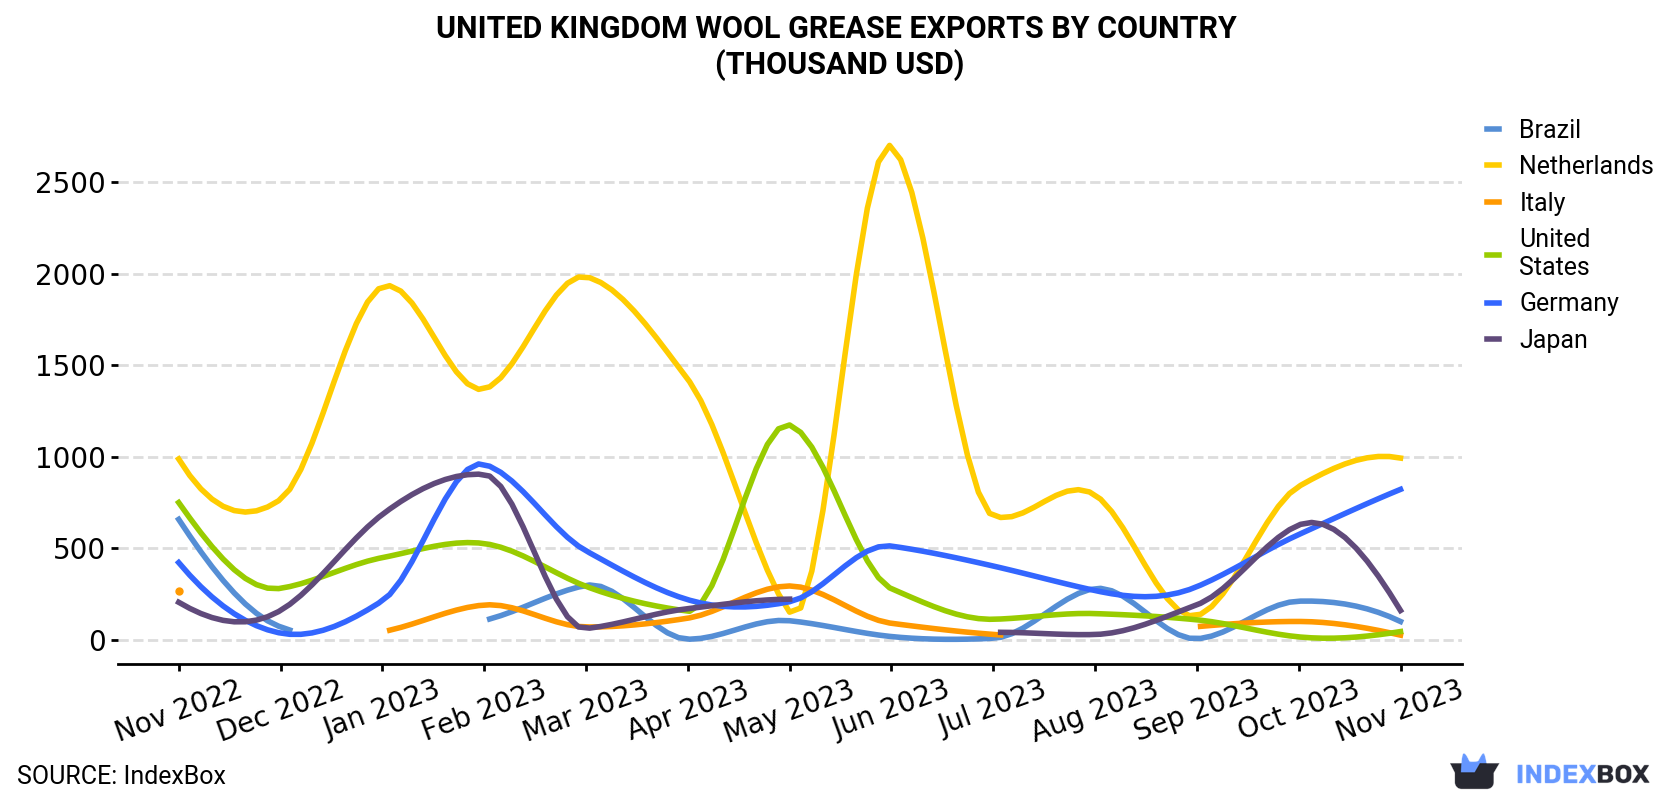 United Kingdom Wool Grease Exports By Country (Thousand USD)